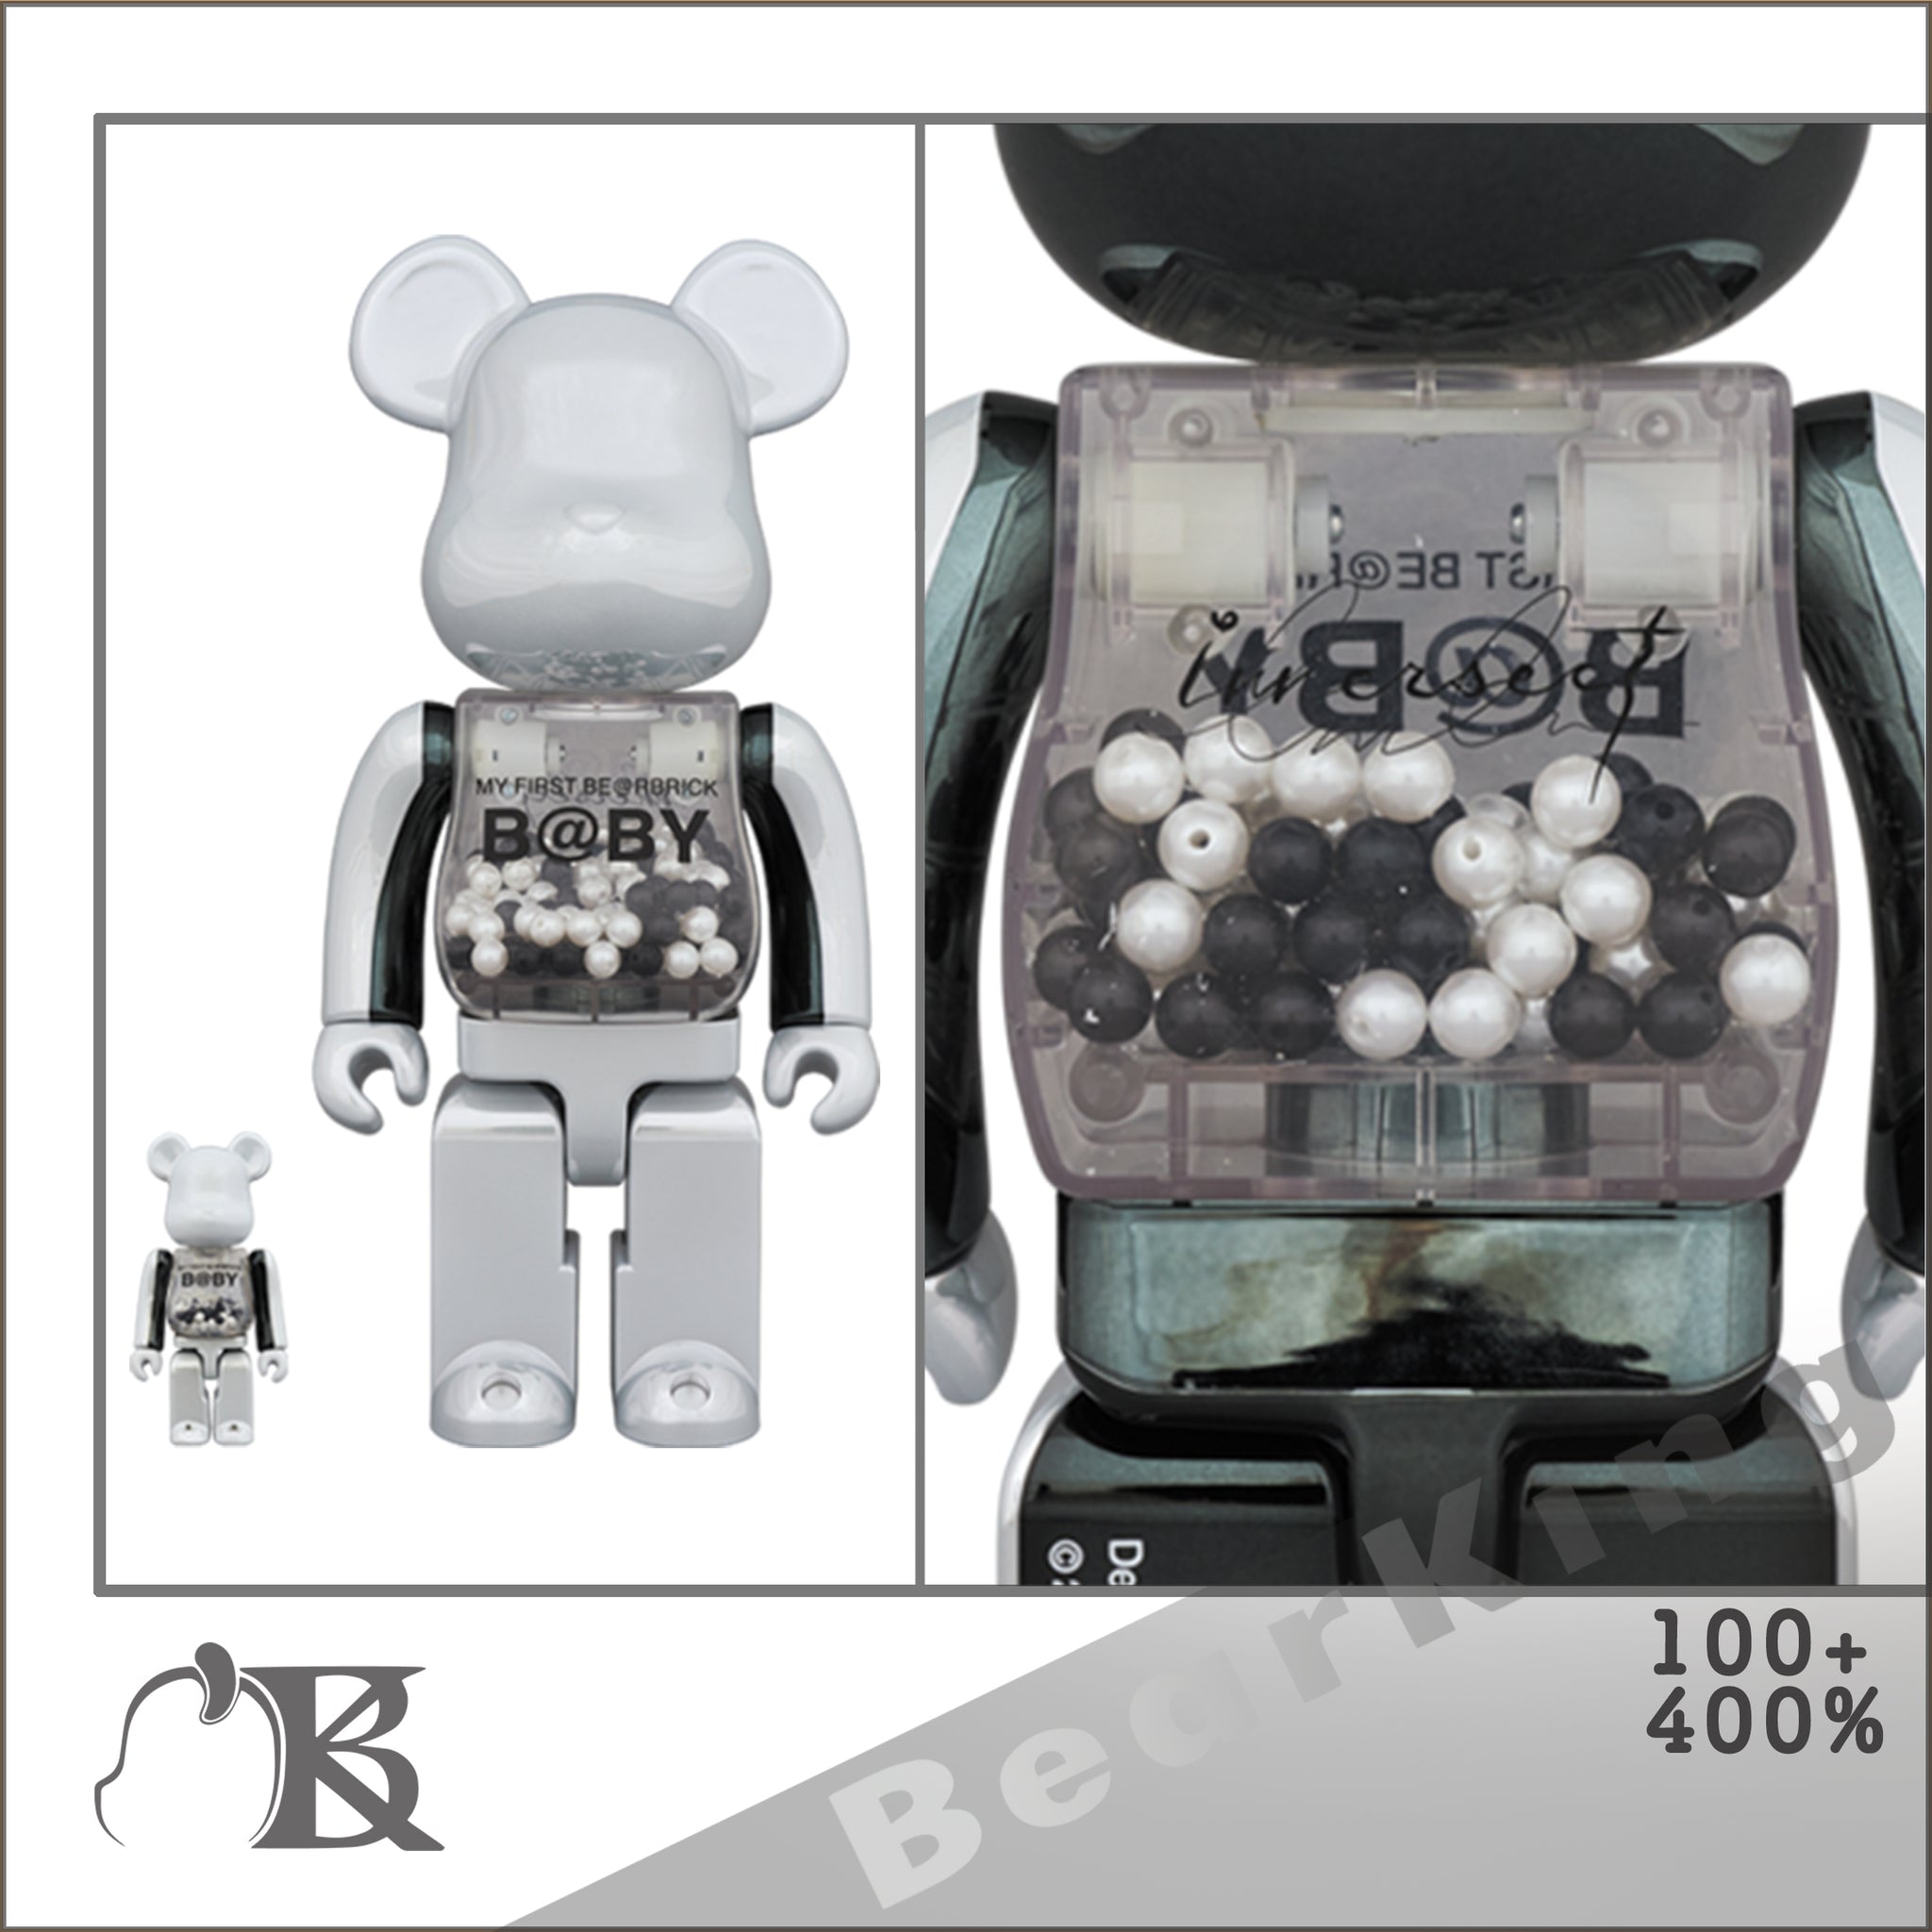 MY FIRST BE@RBRICK 1000% Ver. B@BY